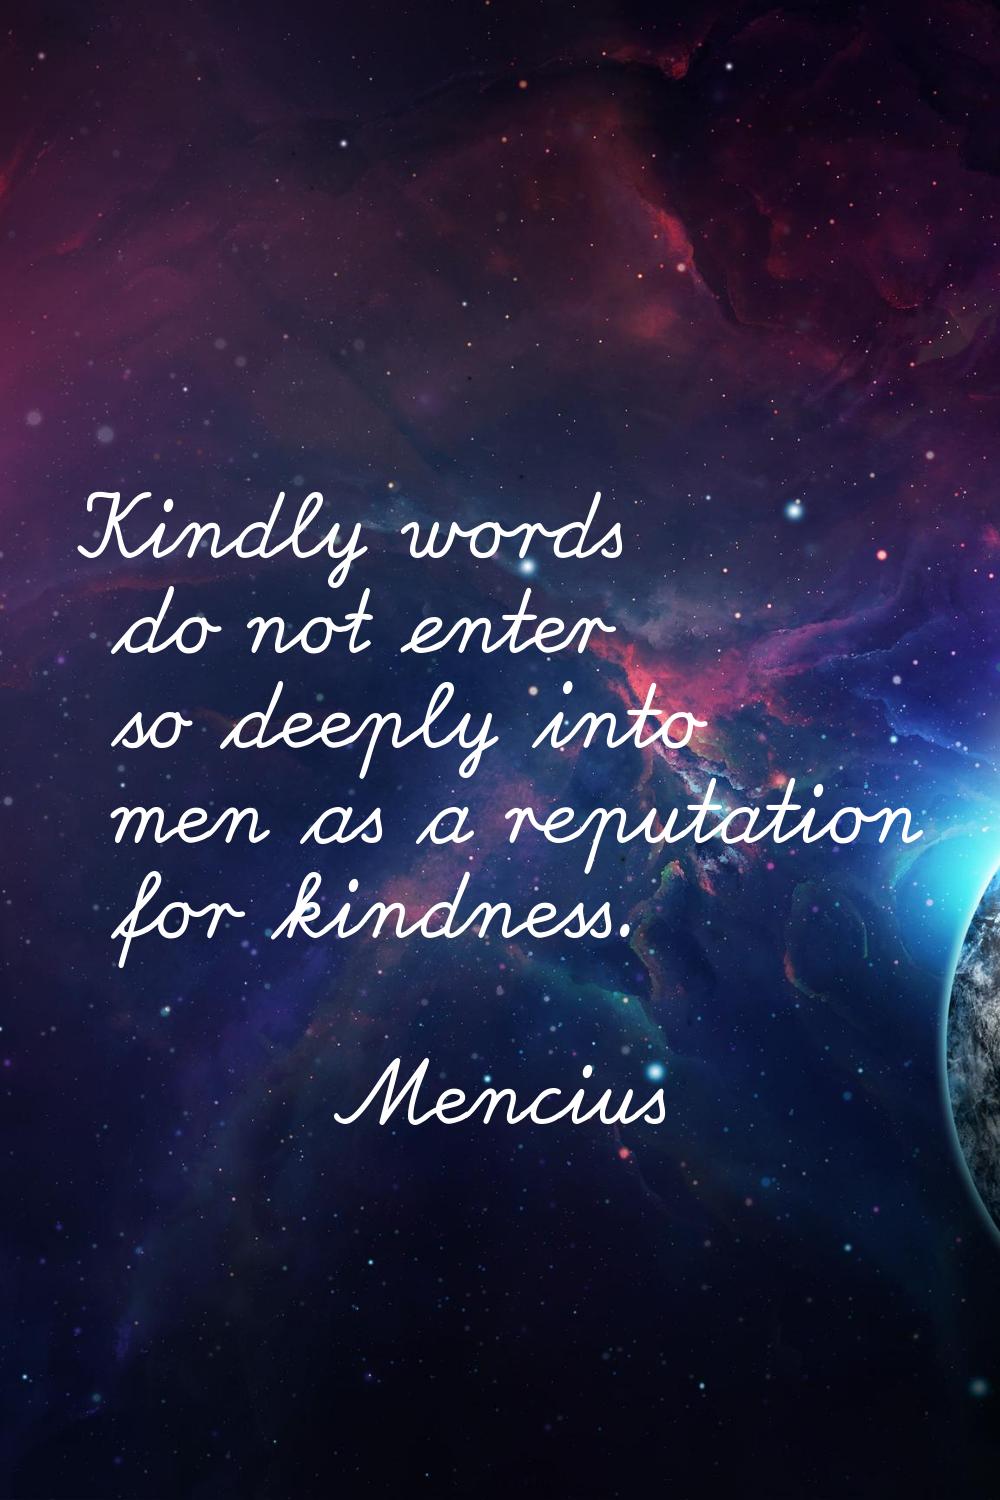 Kindly words do not enter so deeply into men as a reputation for kindness.